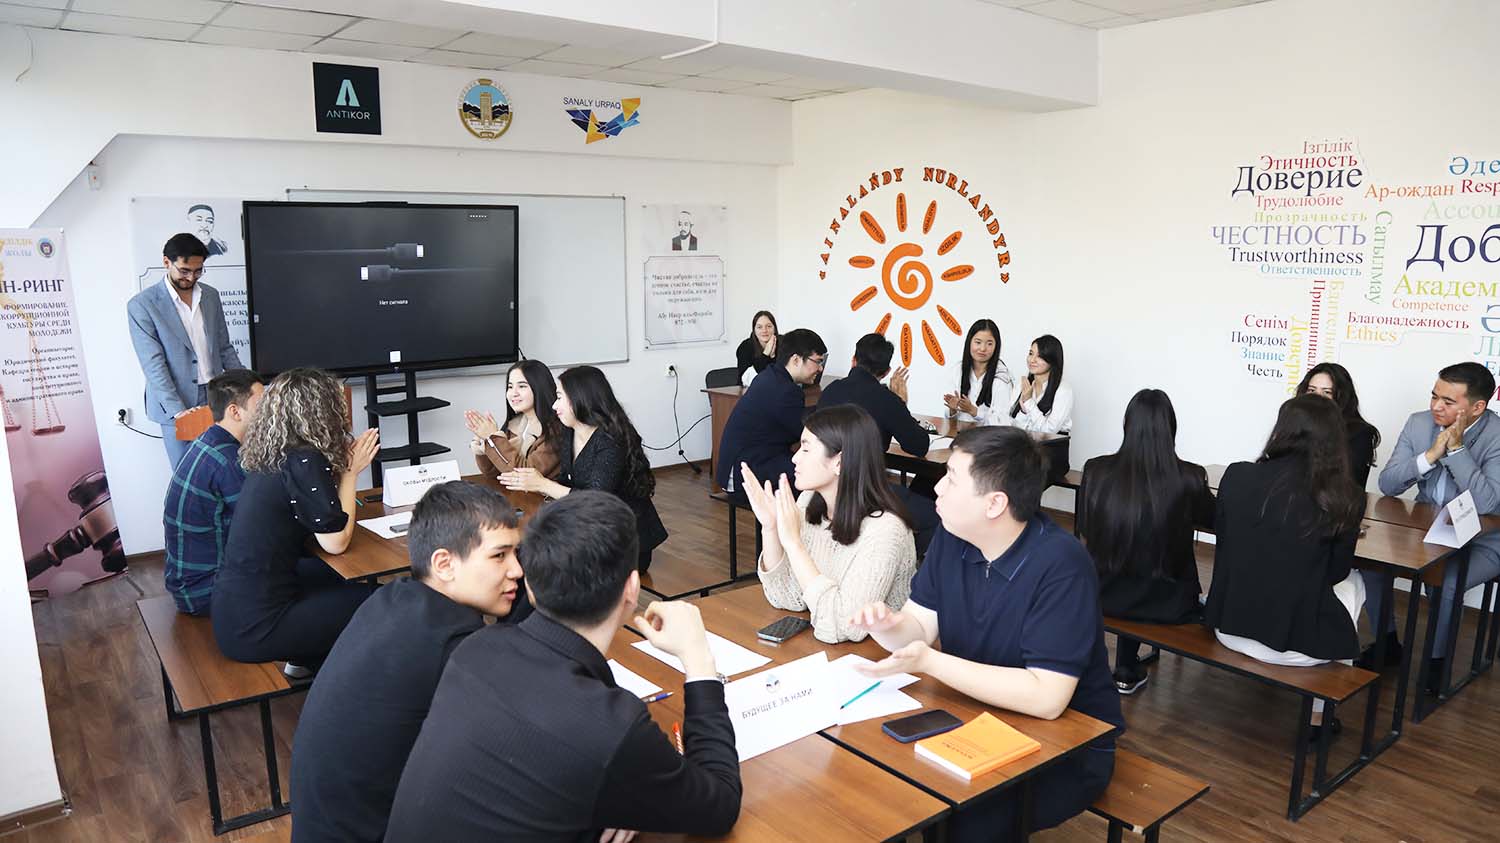 Students of KazNU took part in an intellectual game